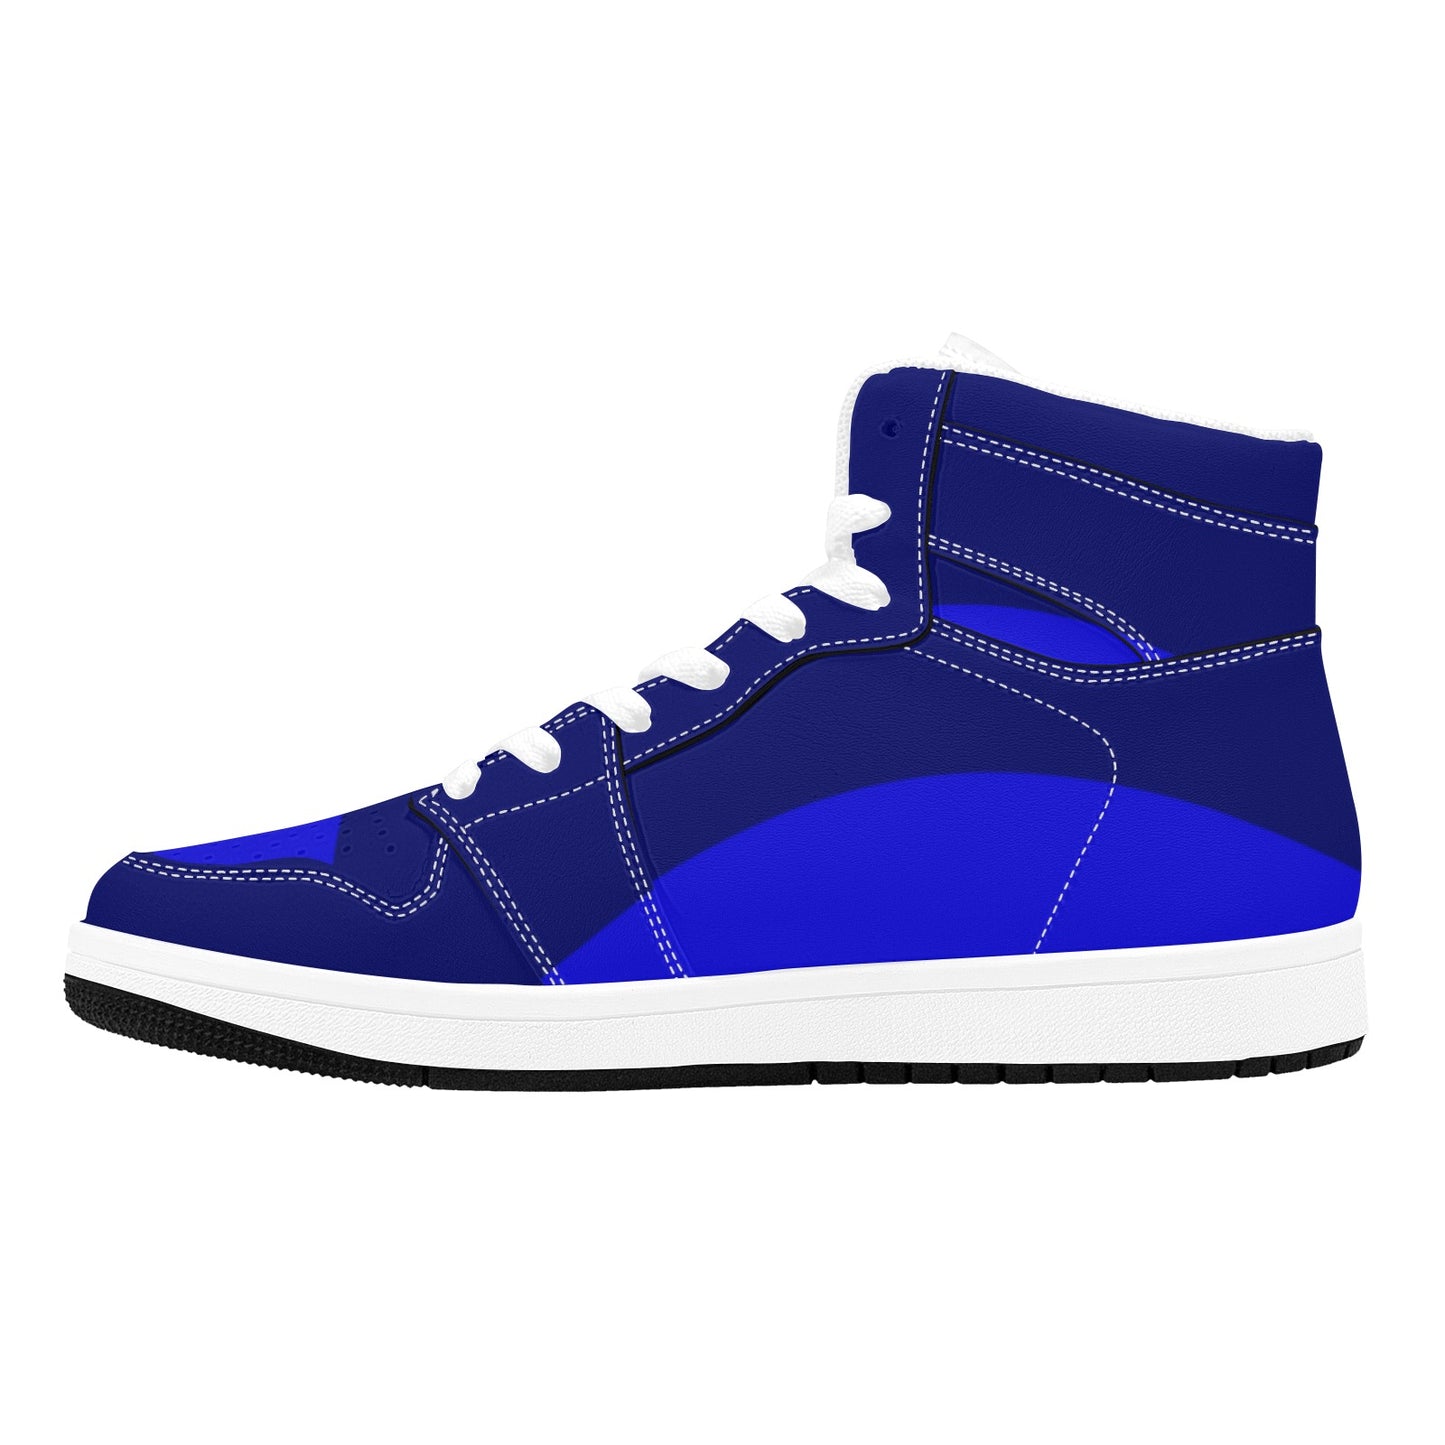 Blue High Top Sneakers Three Tone Blue Colors High Top Sneakers Men's High Top Sneakers